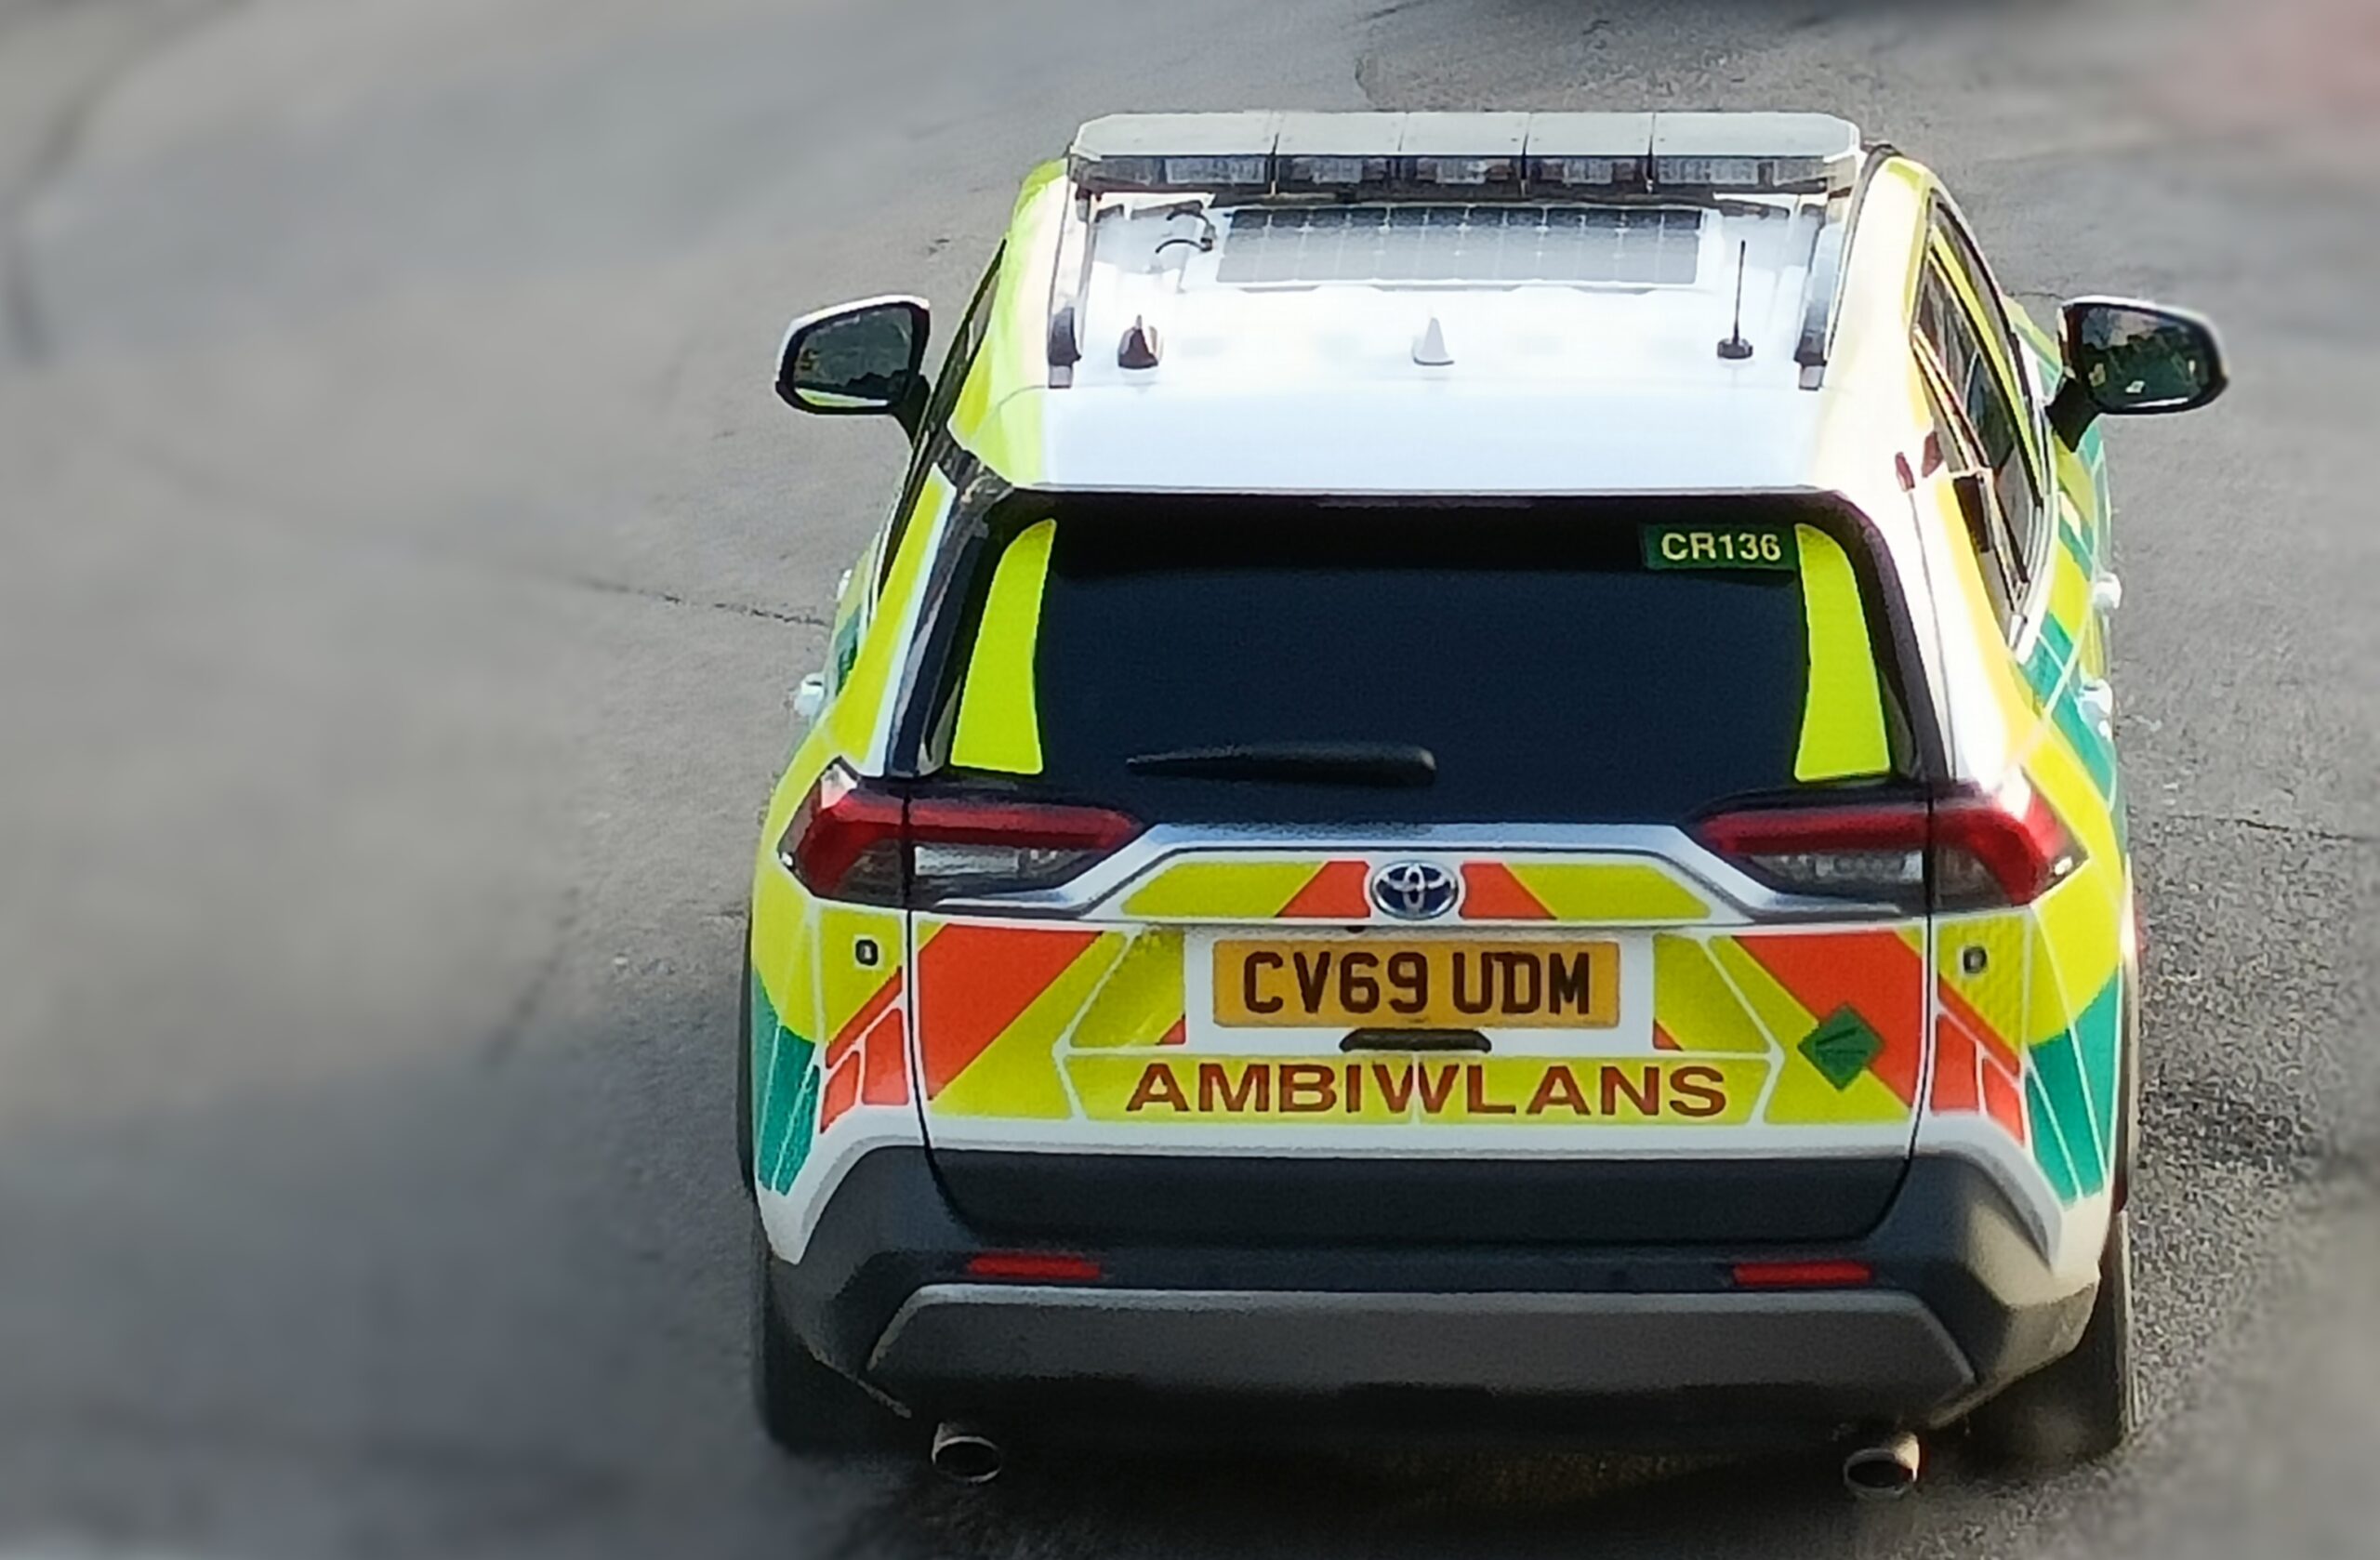 Welsh Ambulance Service to host bi-monthly board meeting next week